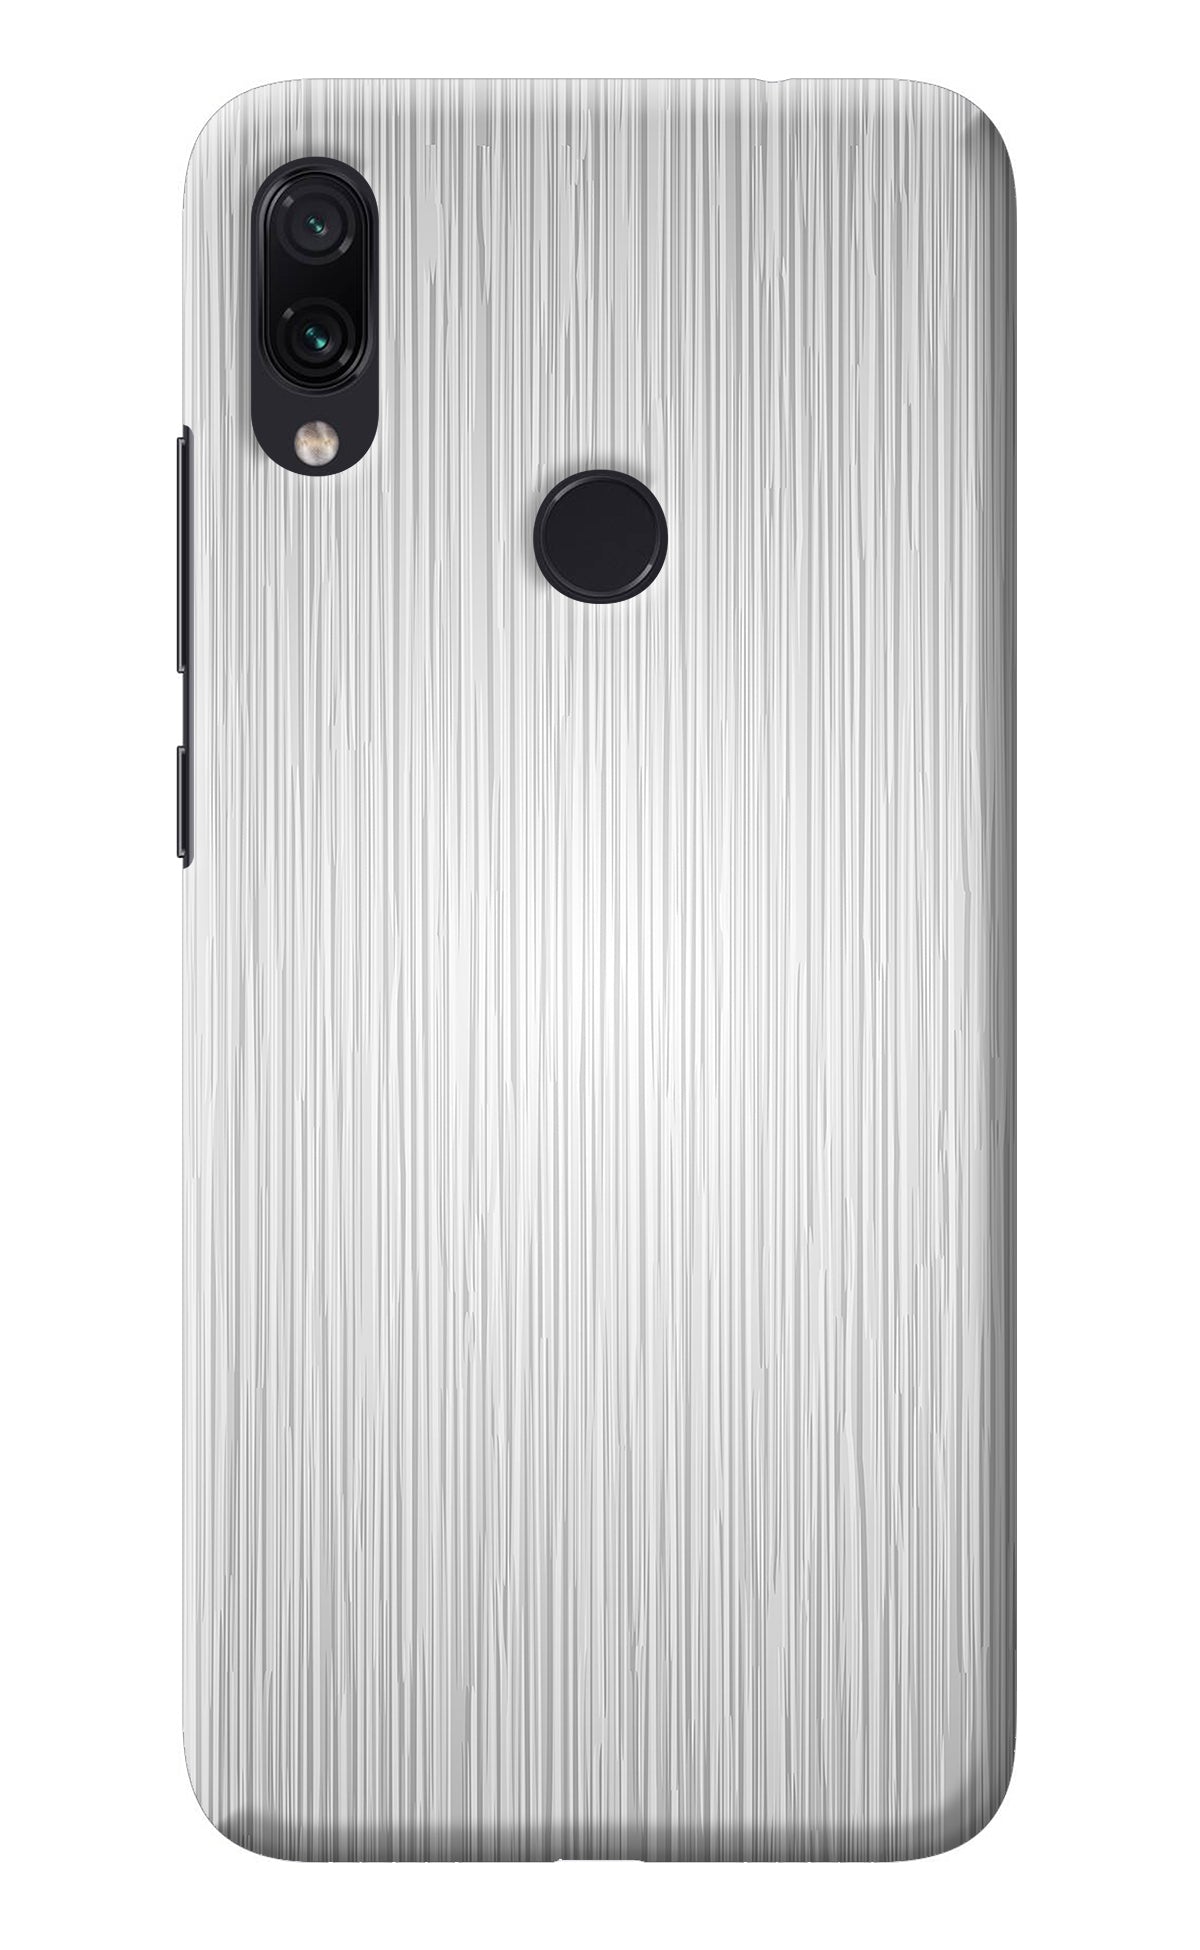 Wooden Grey Texture Redmi Note 7 Pro Back Cover